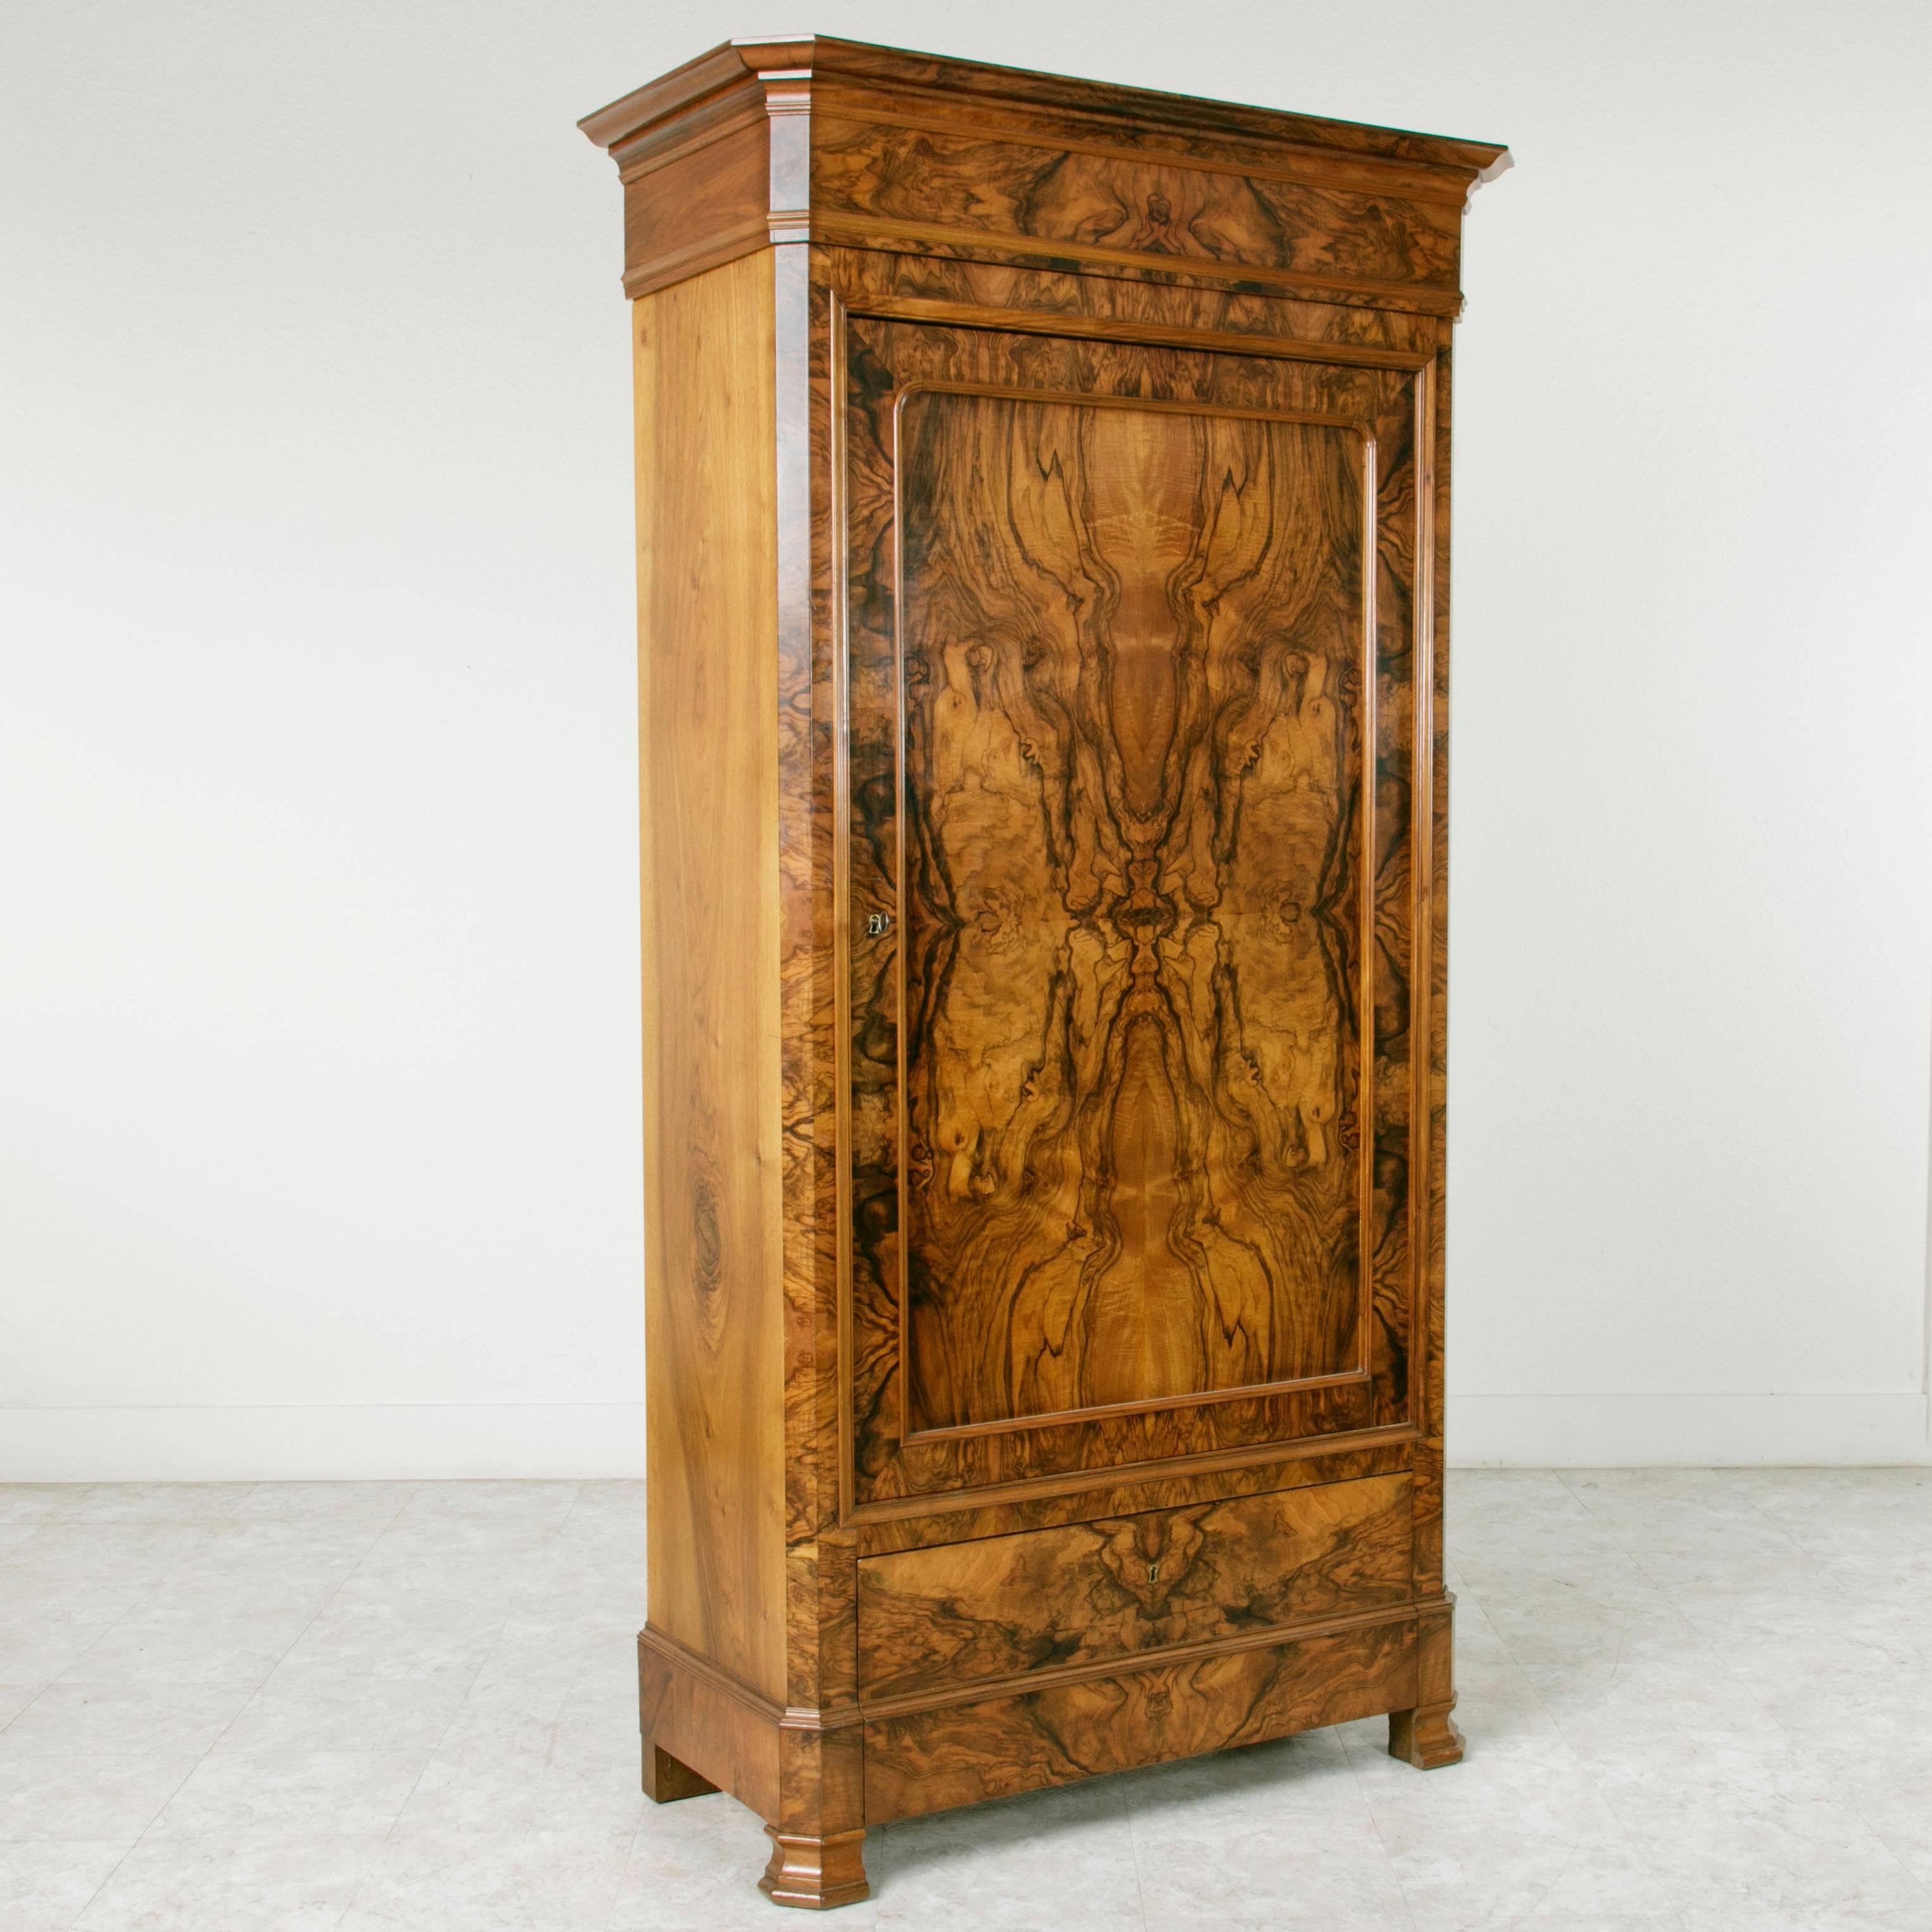 A rare show stopper, this Louis Philippe period bonnetiere features one large door and one drawer. The deep contrast of the burl on this piece combined with its magnificent butterfly effect make this armoire an outstanding example of the Louis